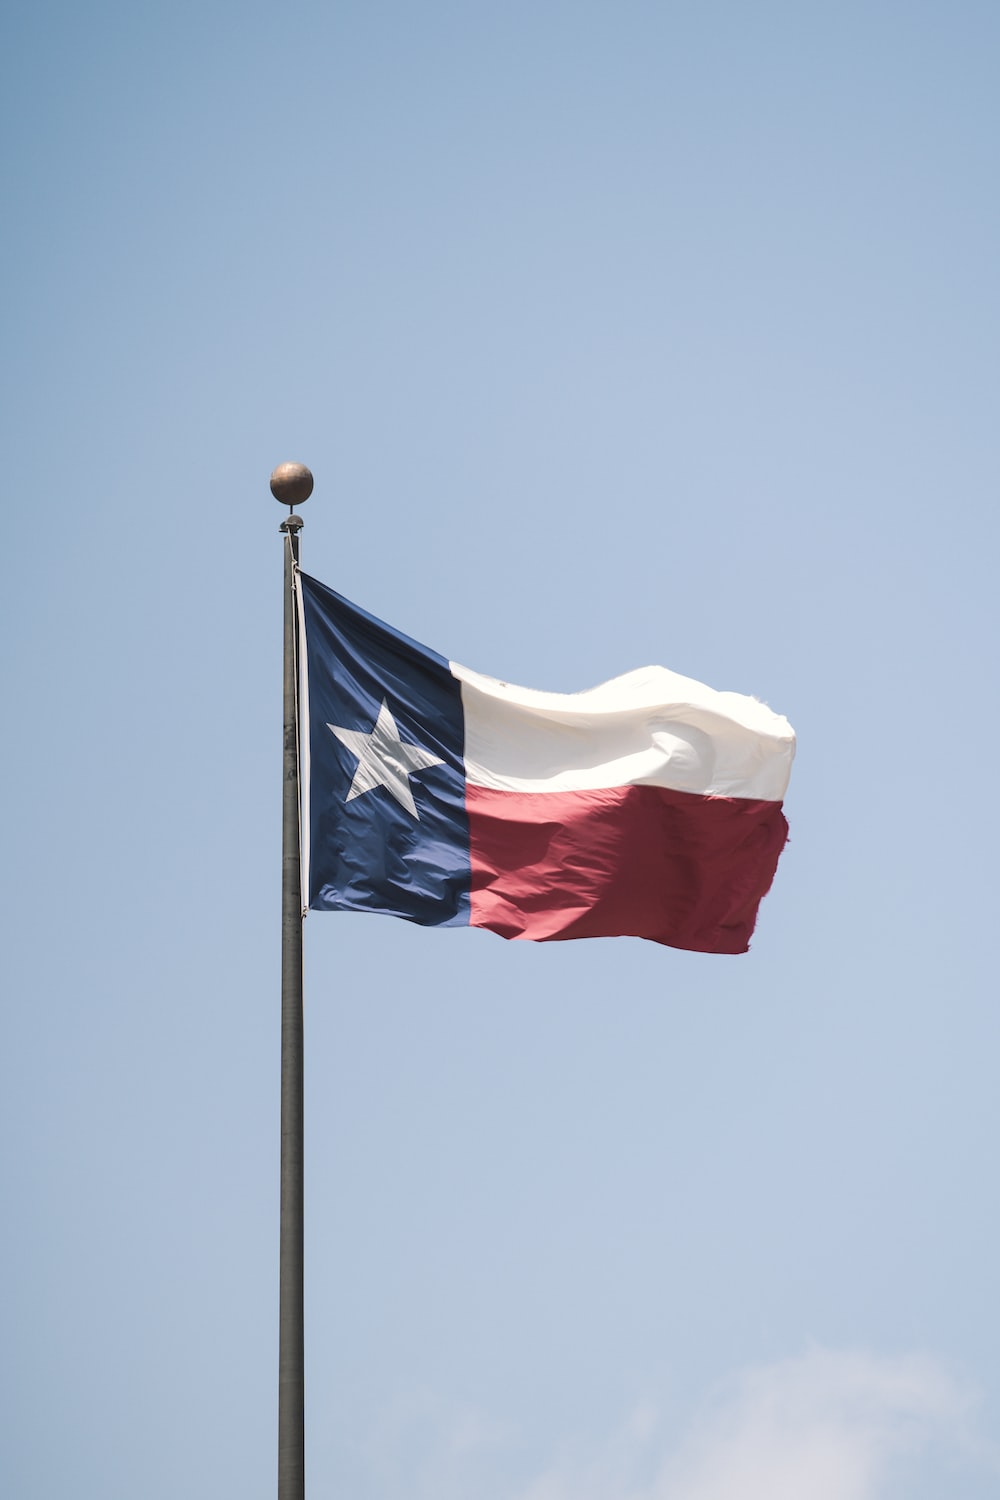 Texas Flag Picture. Download Free Image